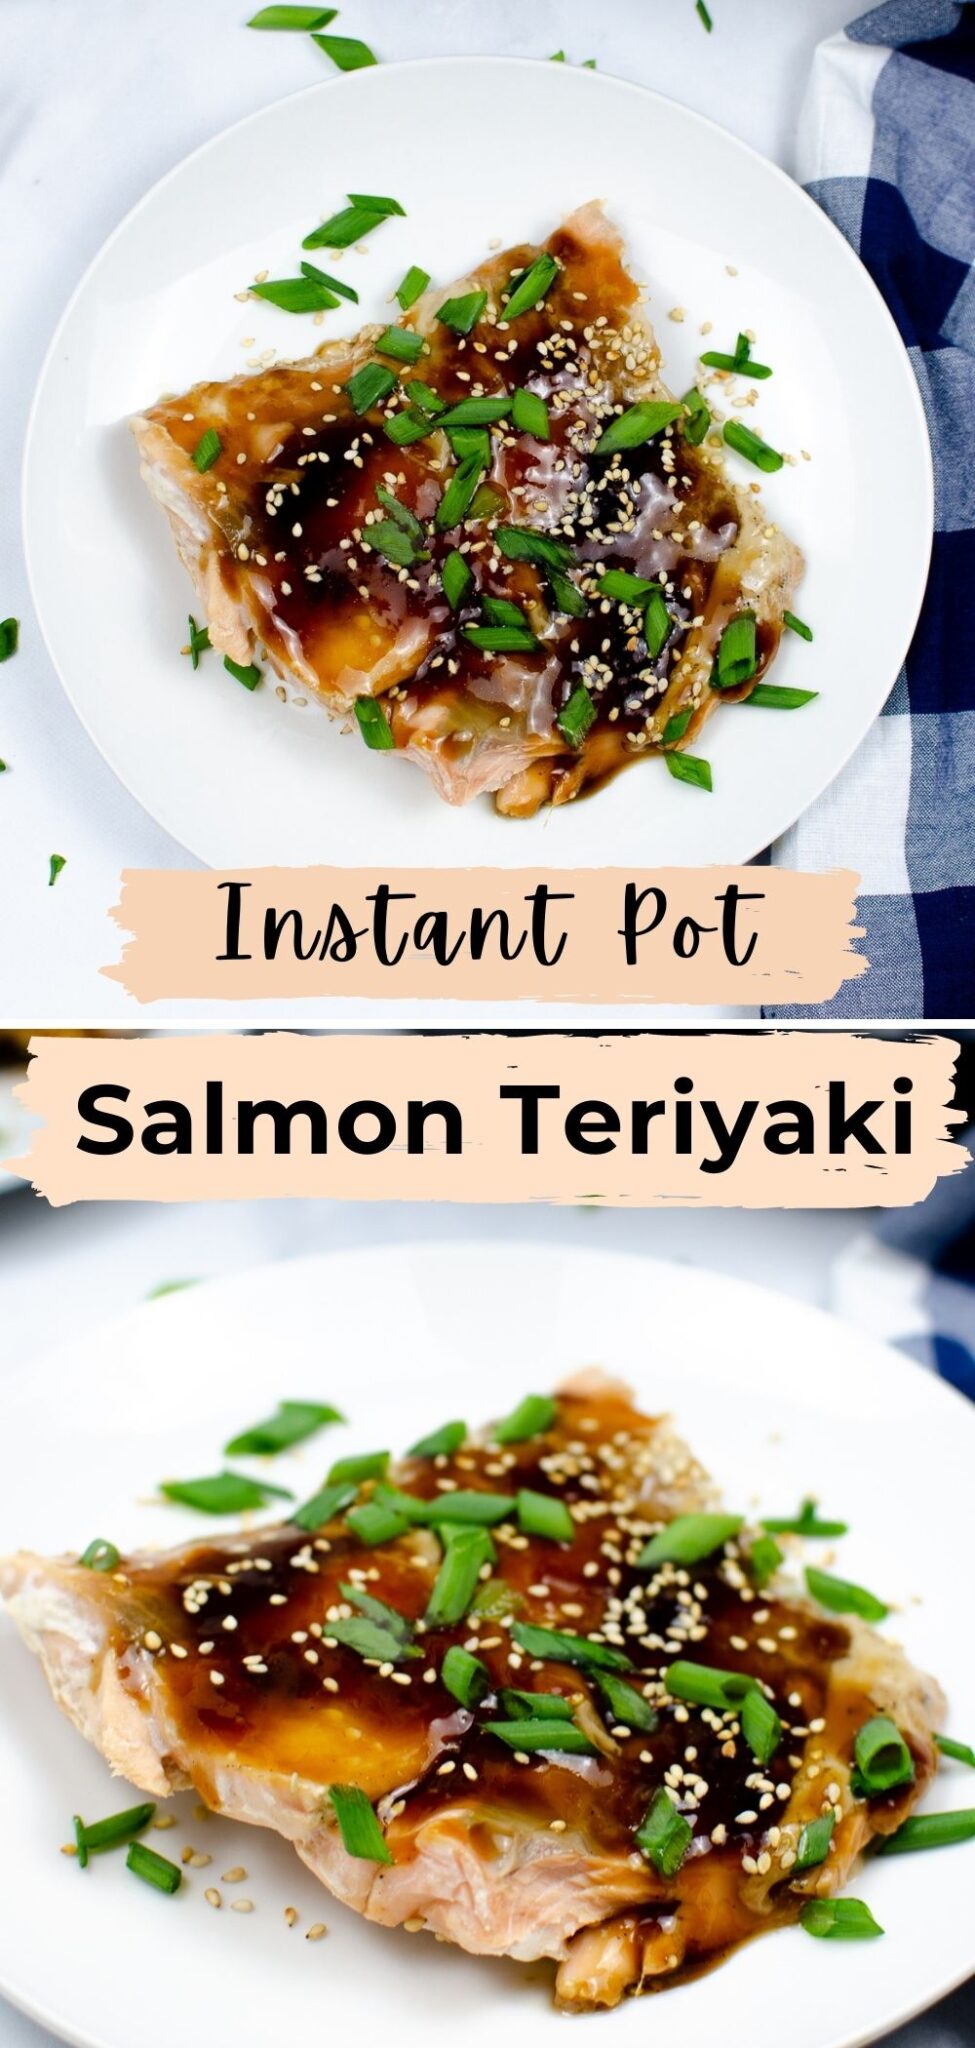 This juicy, moist, and tender flakey salmon in a brown homemade Teriyaki Sauce is ready in just 15 minutes in an instant pot. #instantpot #salmon #teriyakisauce #dinner #recipe via @wondermomwannab